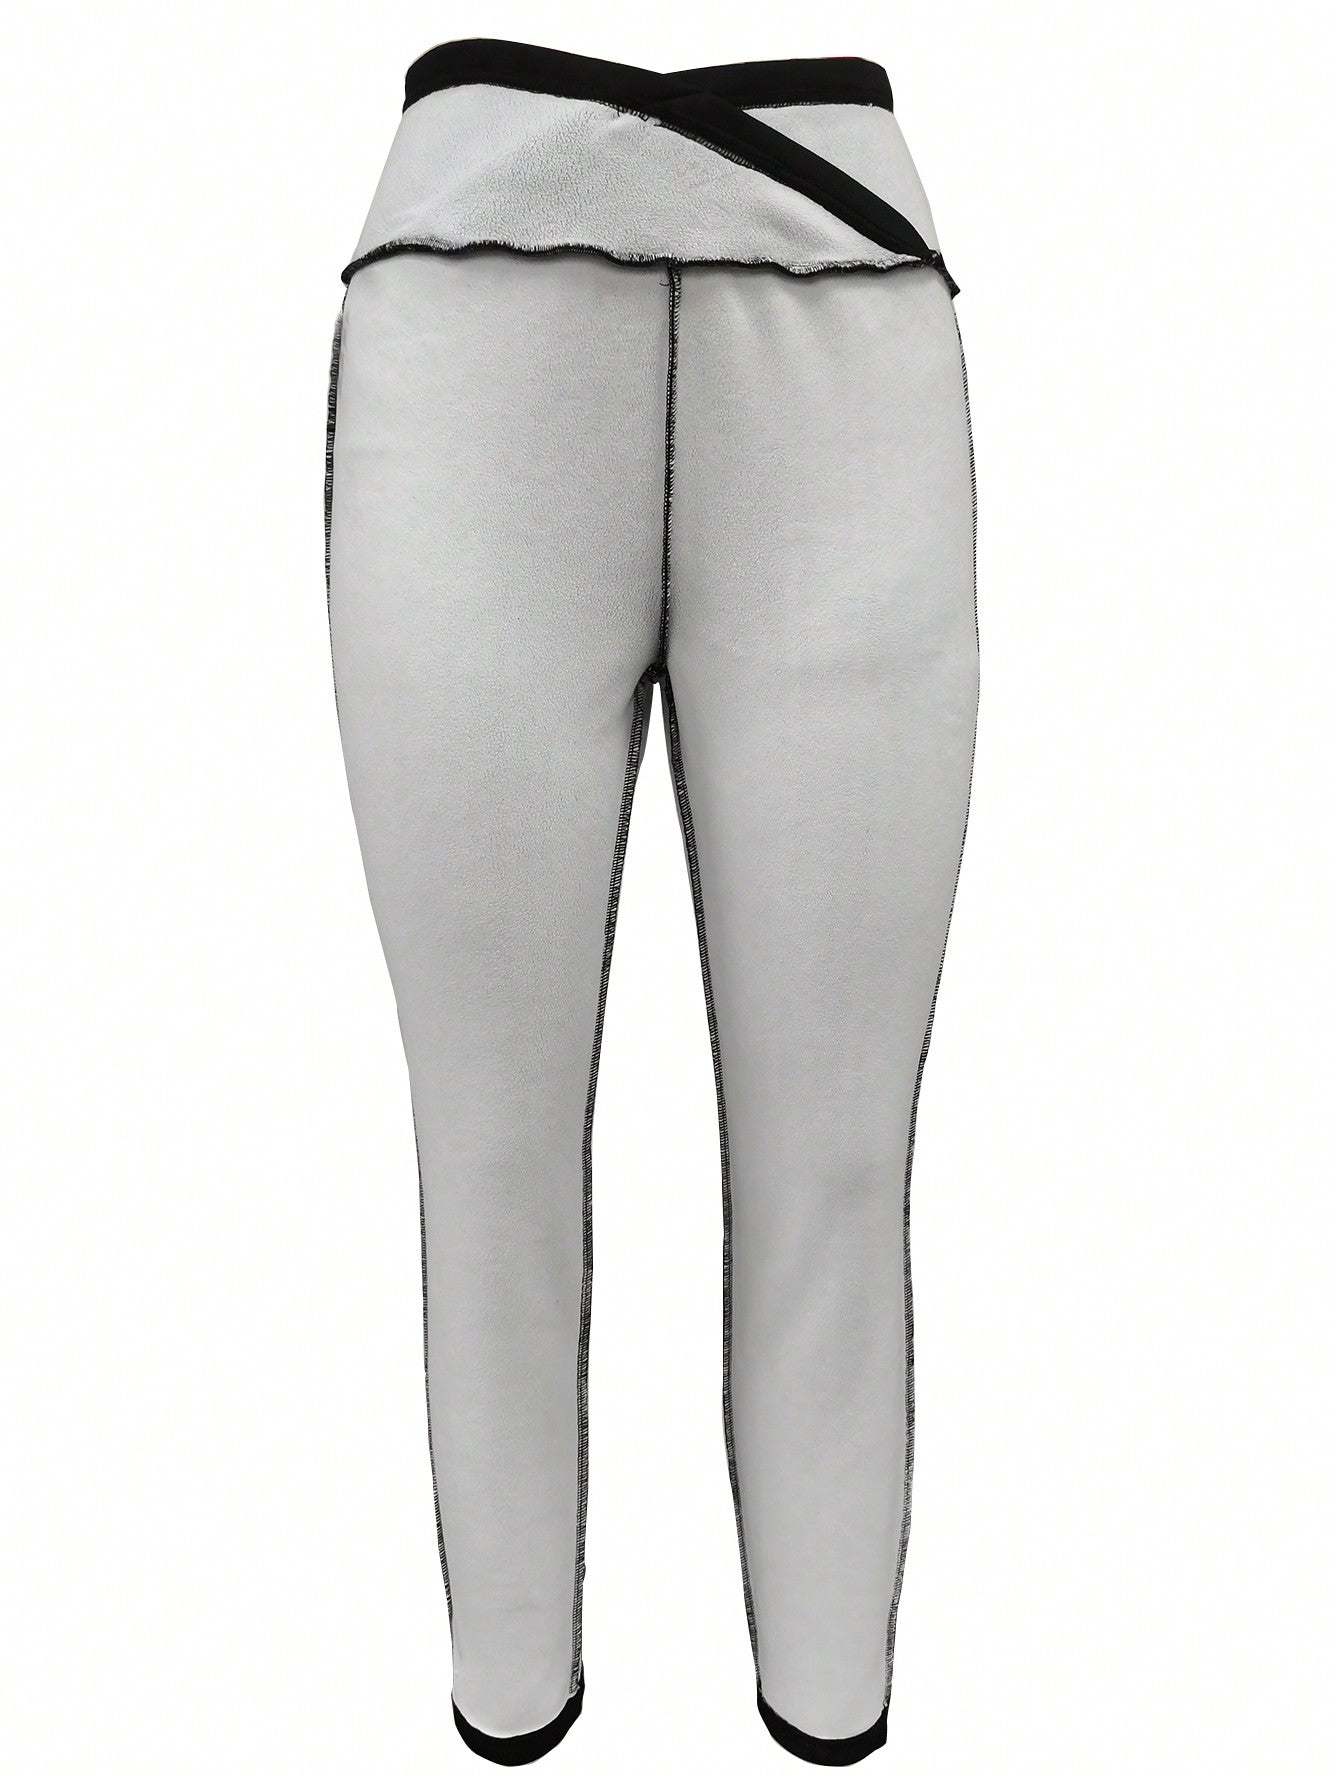 Cozy Comfort: Solid Thermal Lined Leggings for Ultimate Warmth and Style